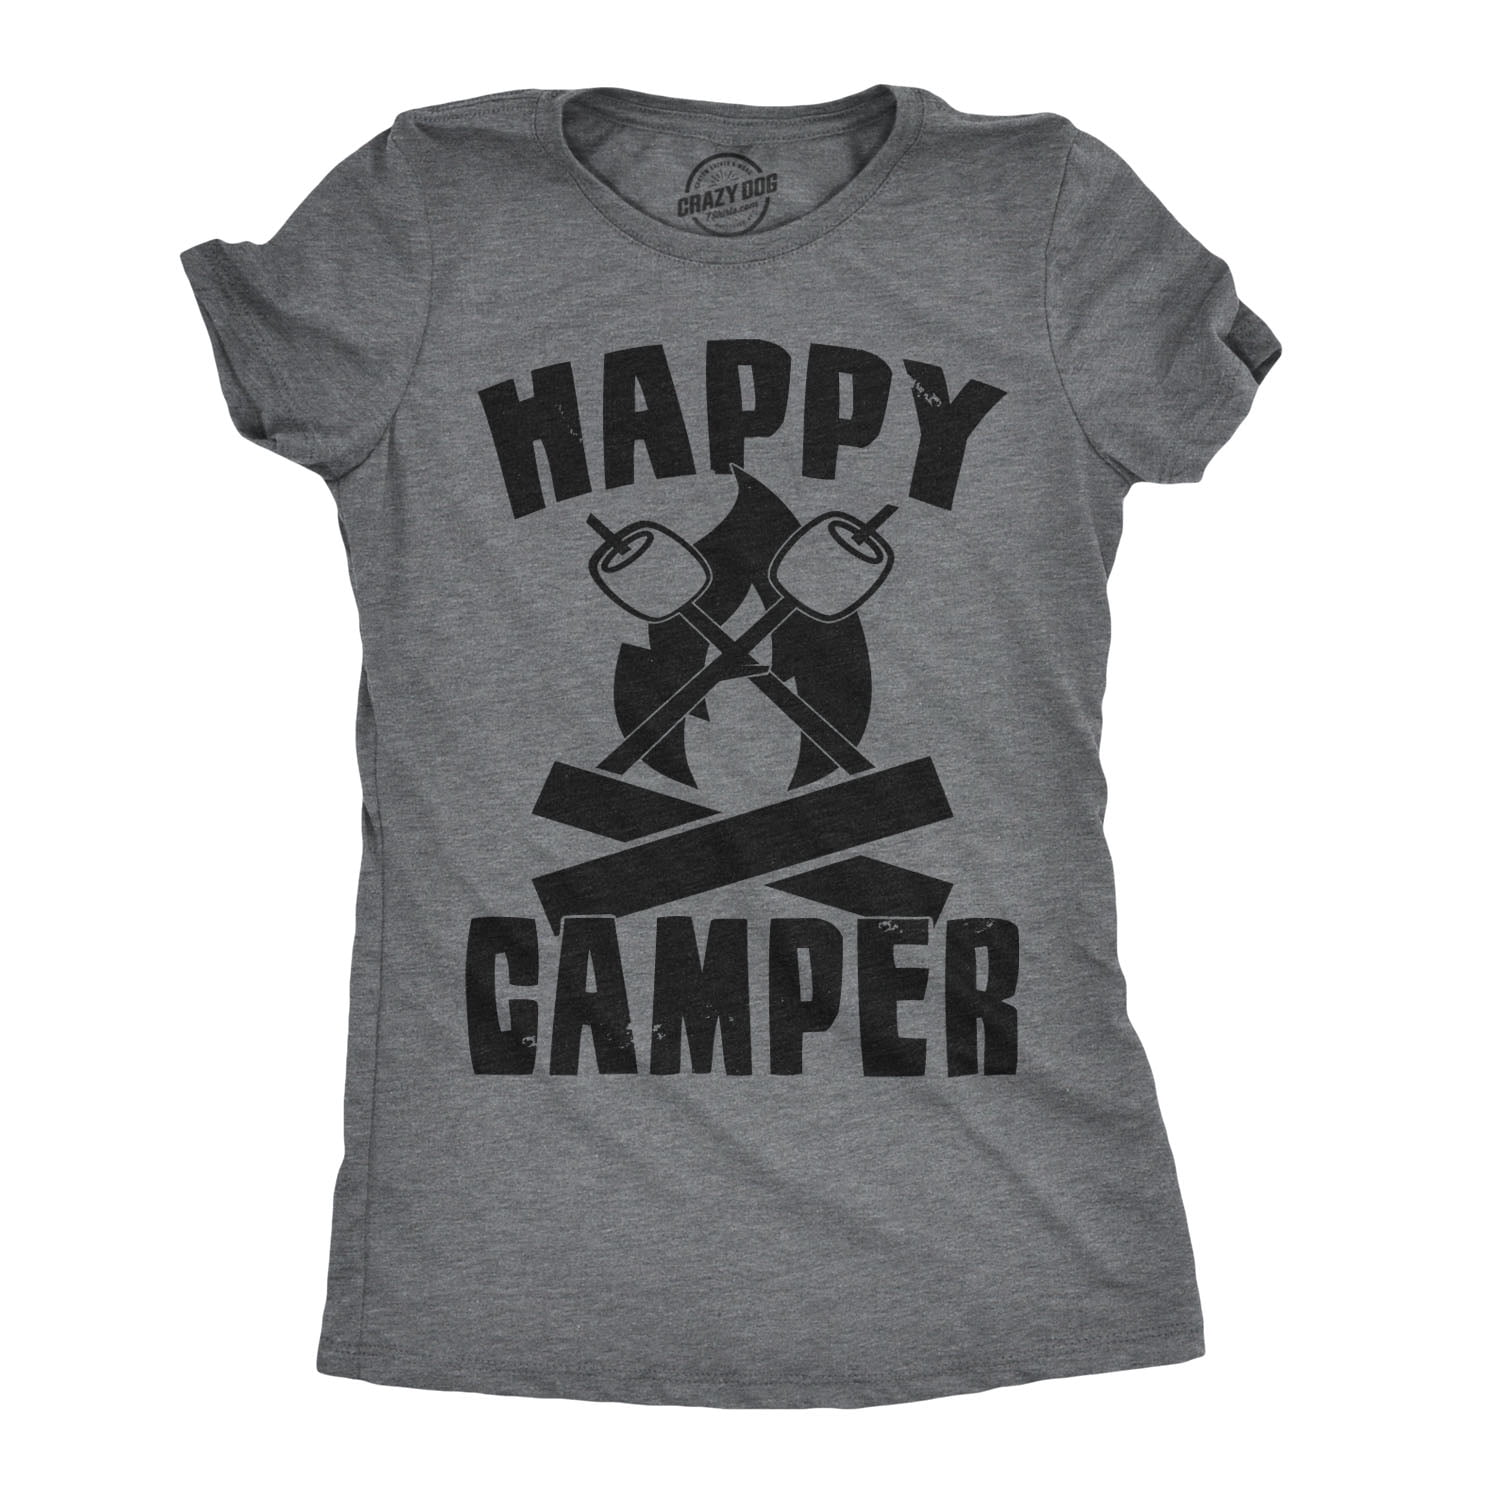 Women Happy Camper Funny Cute Camper Tee Shirts Graphic Letter Print Tee Shirts